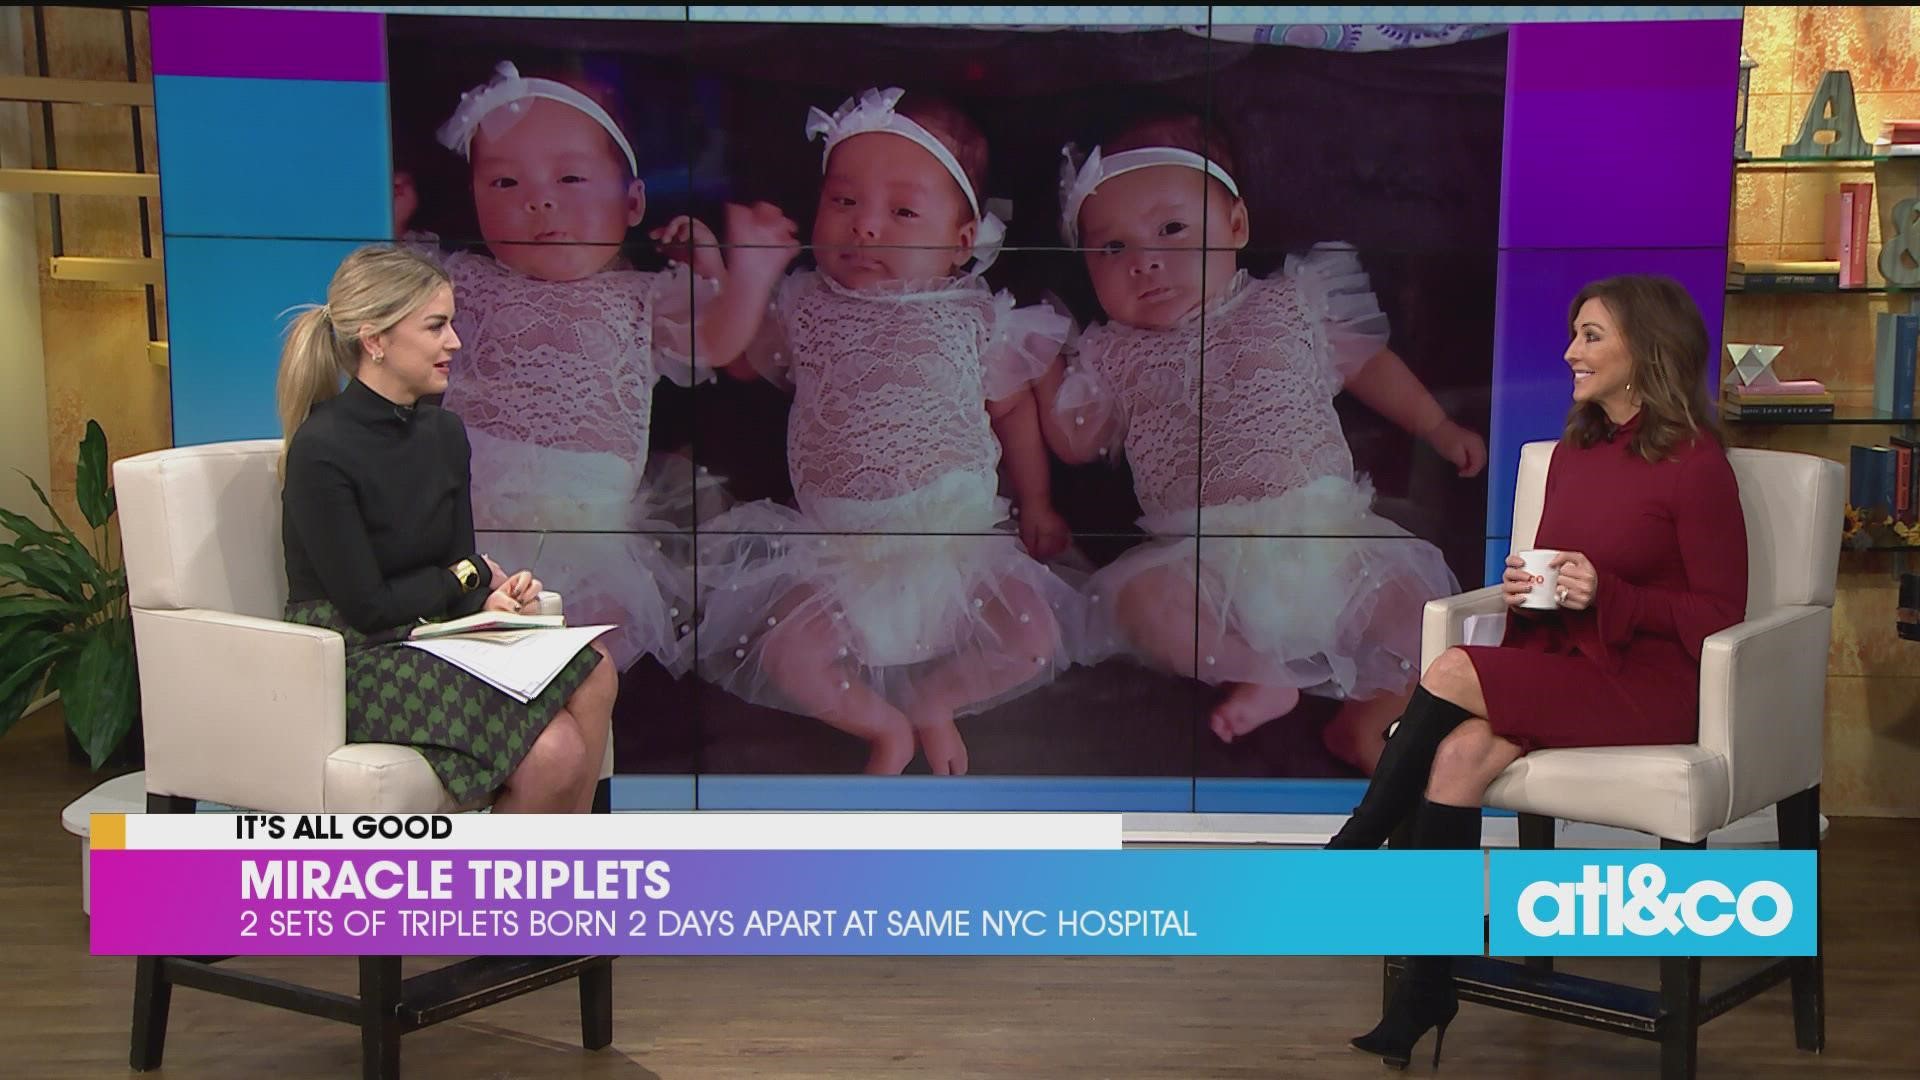 Two sets of triplets were born two days apart at the same New York hospital -- all baby girls!